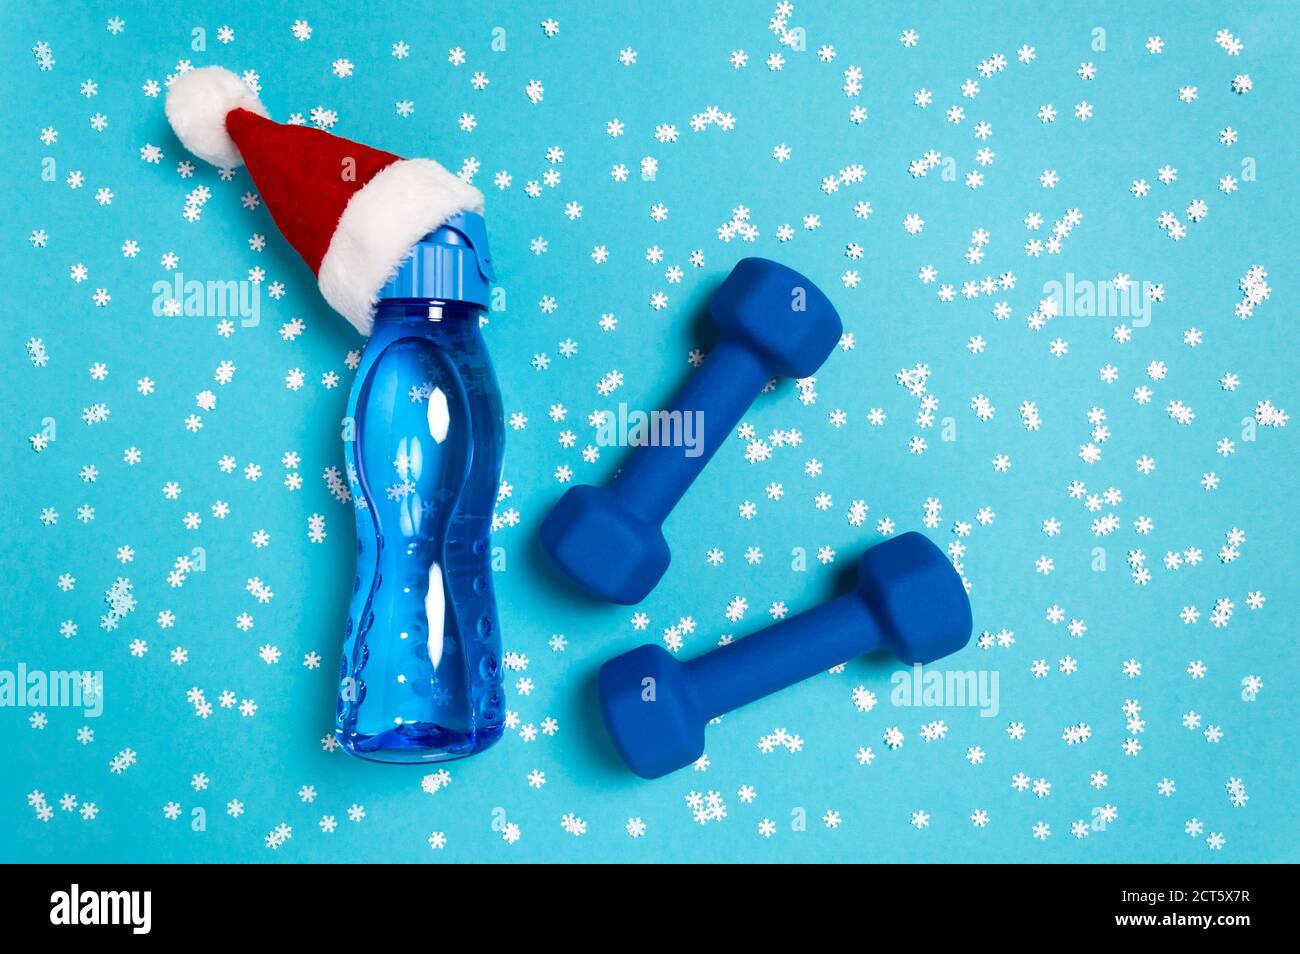 Christmas sports flat lay with dumbbells and water bottle in red Santa's hat on blue background. Christmas and new year holiday concept for fitness, w Stock Photo